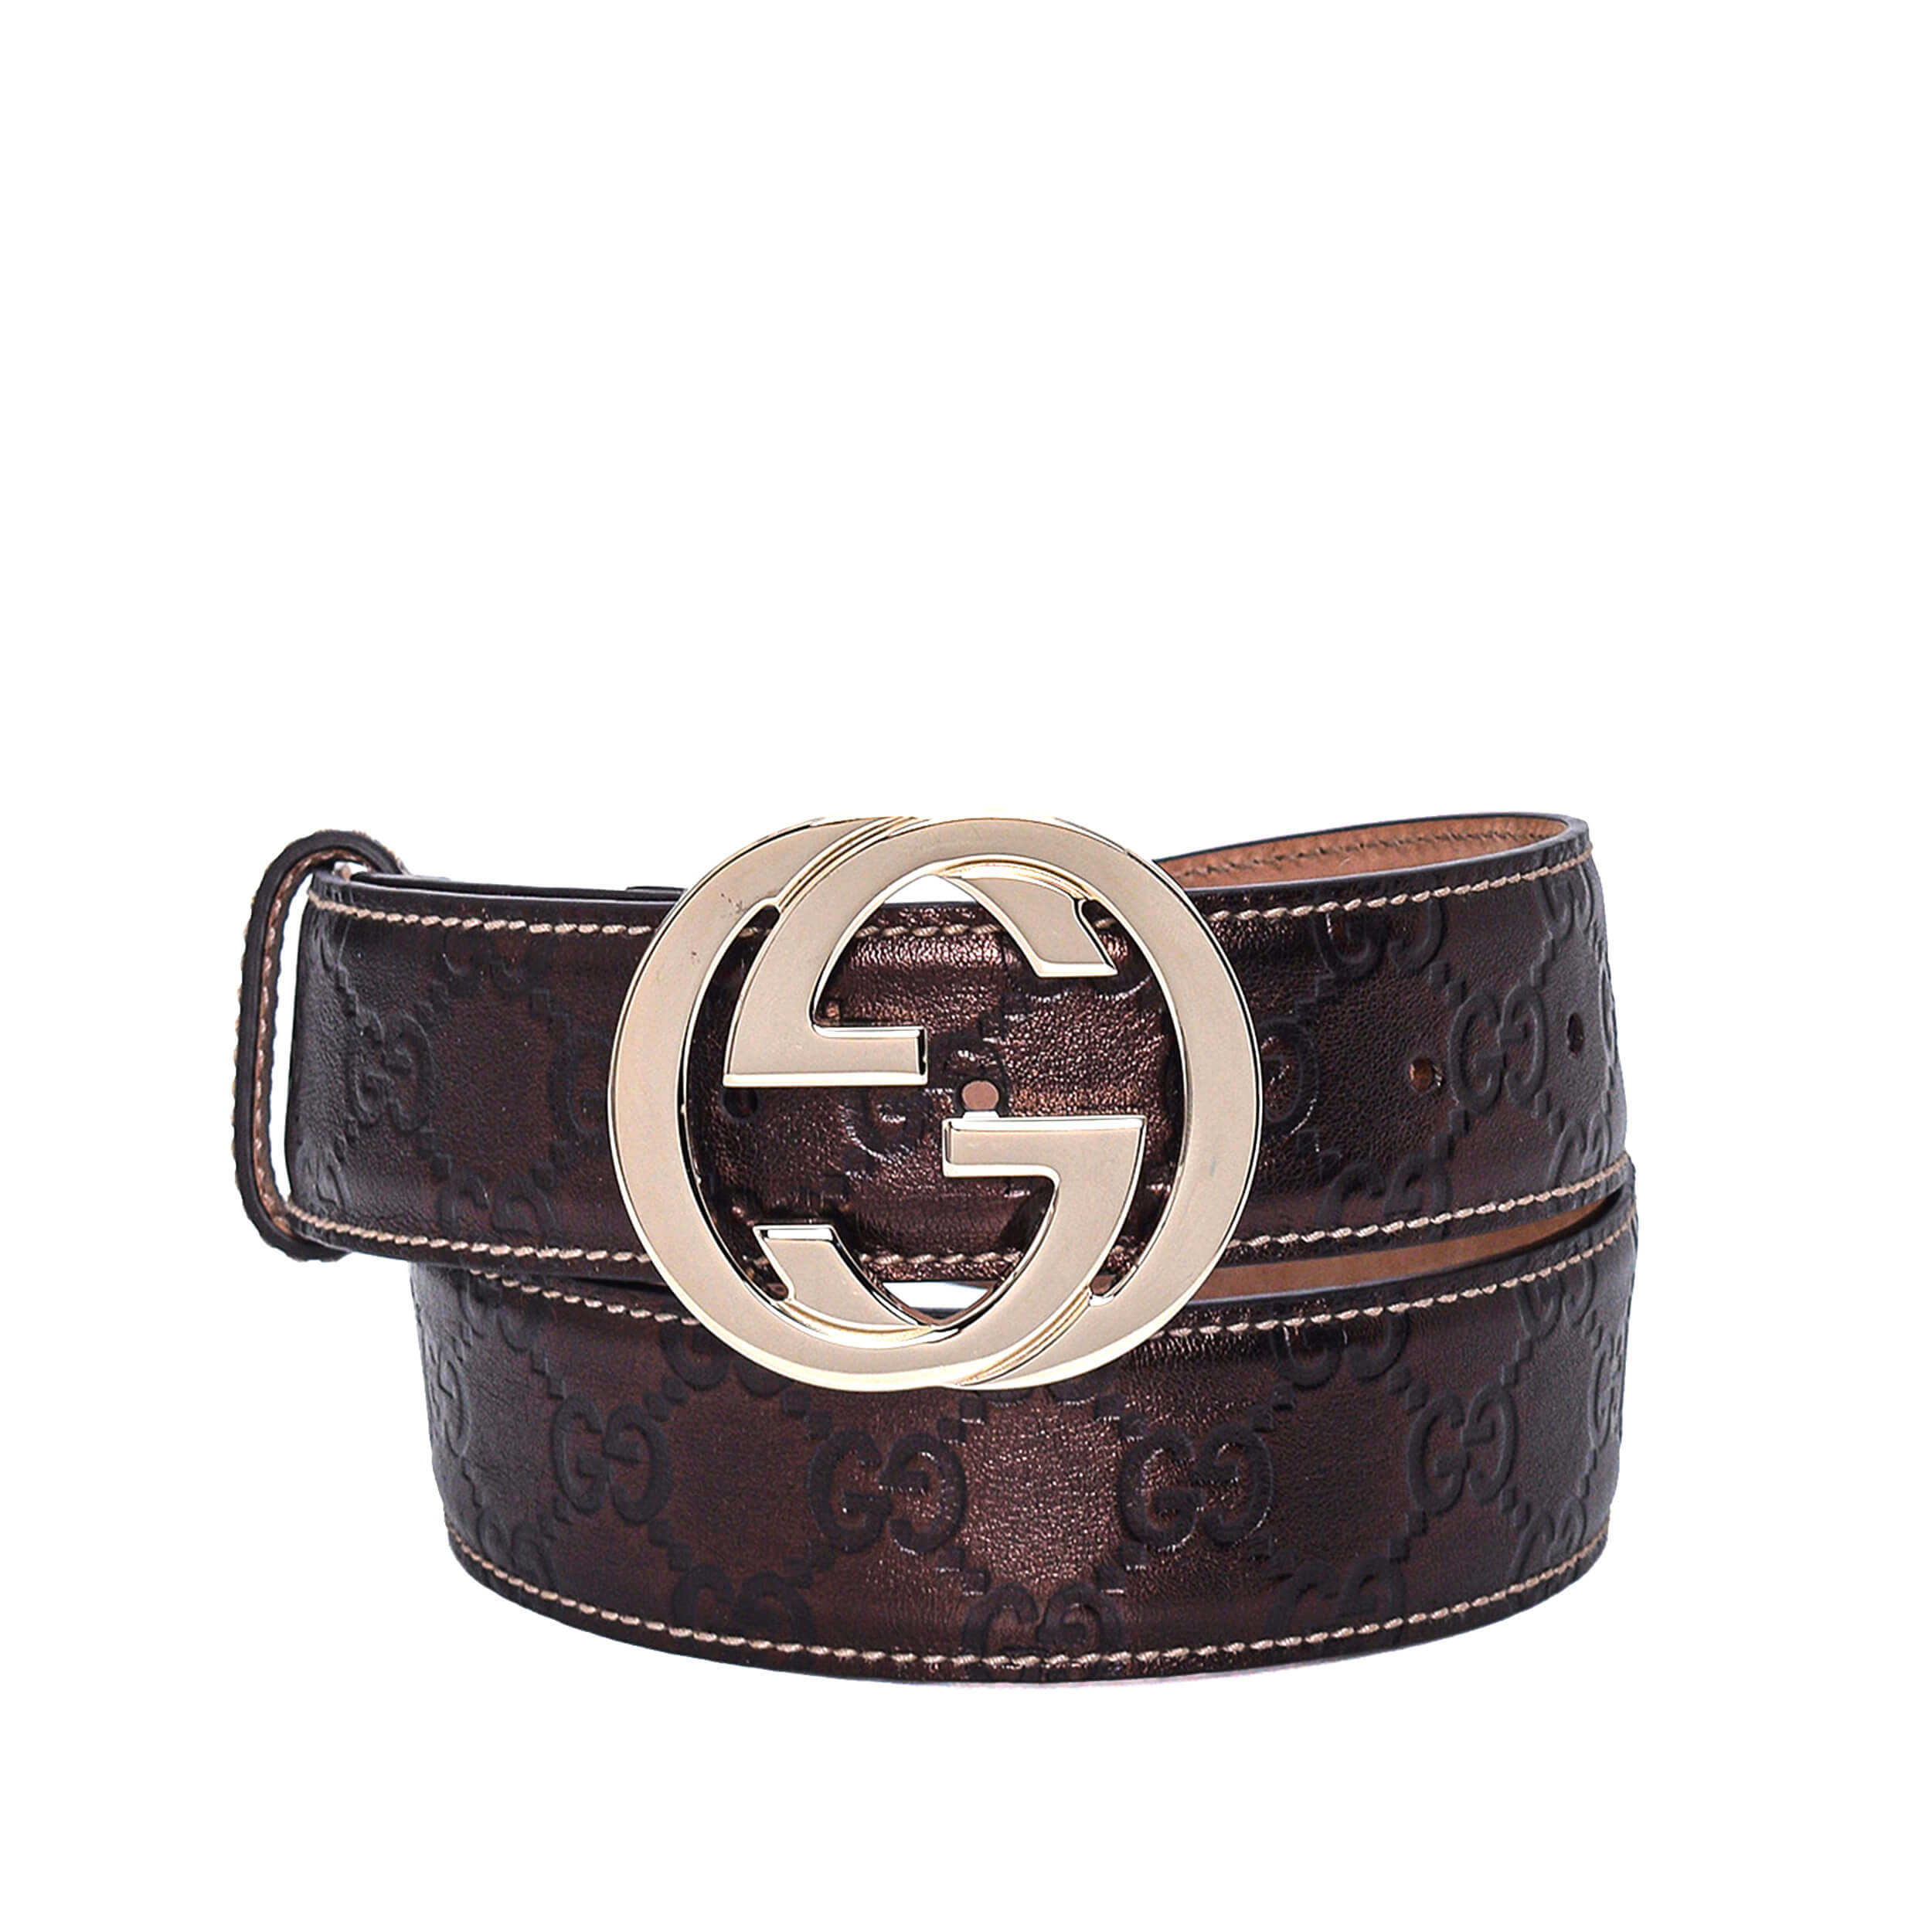 Gucci - Brown GG Supreme Leather  GG Buckle Belt